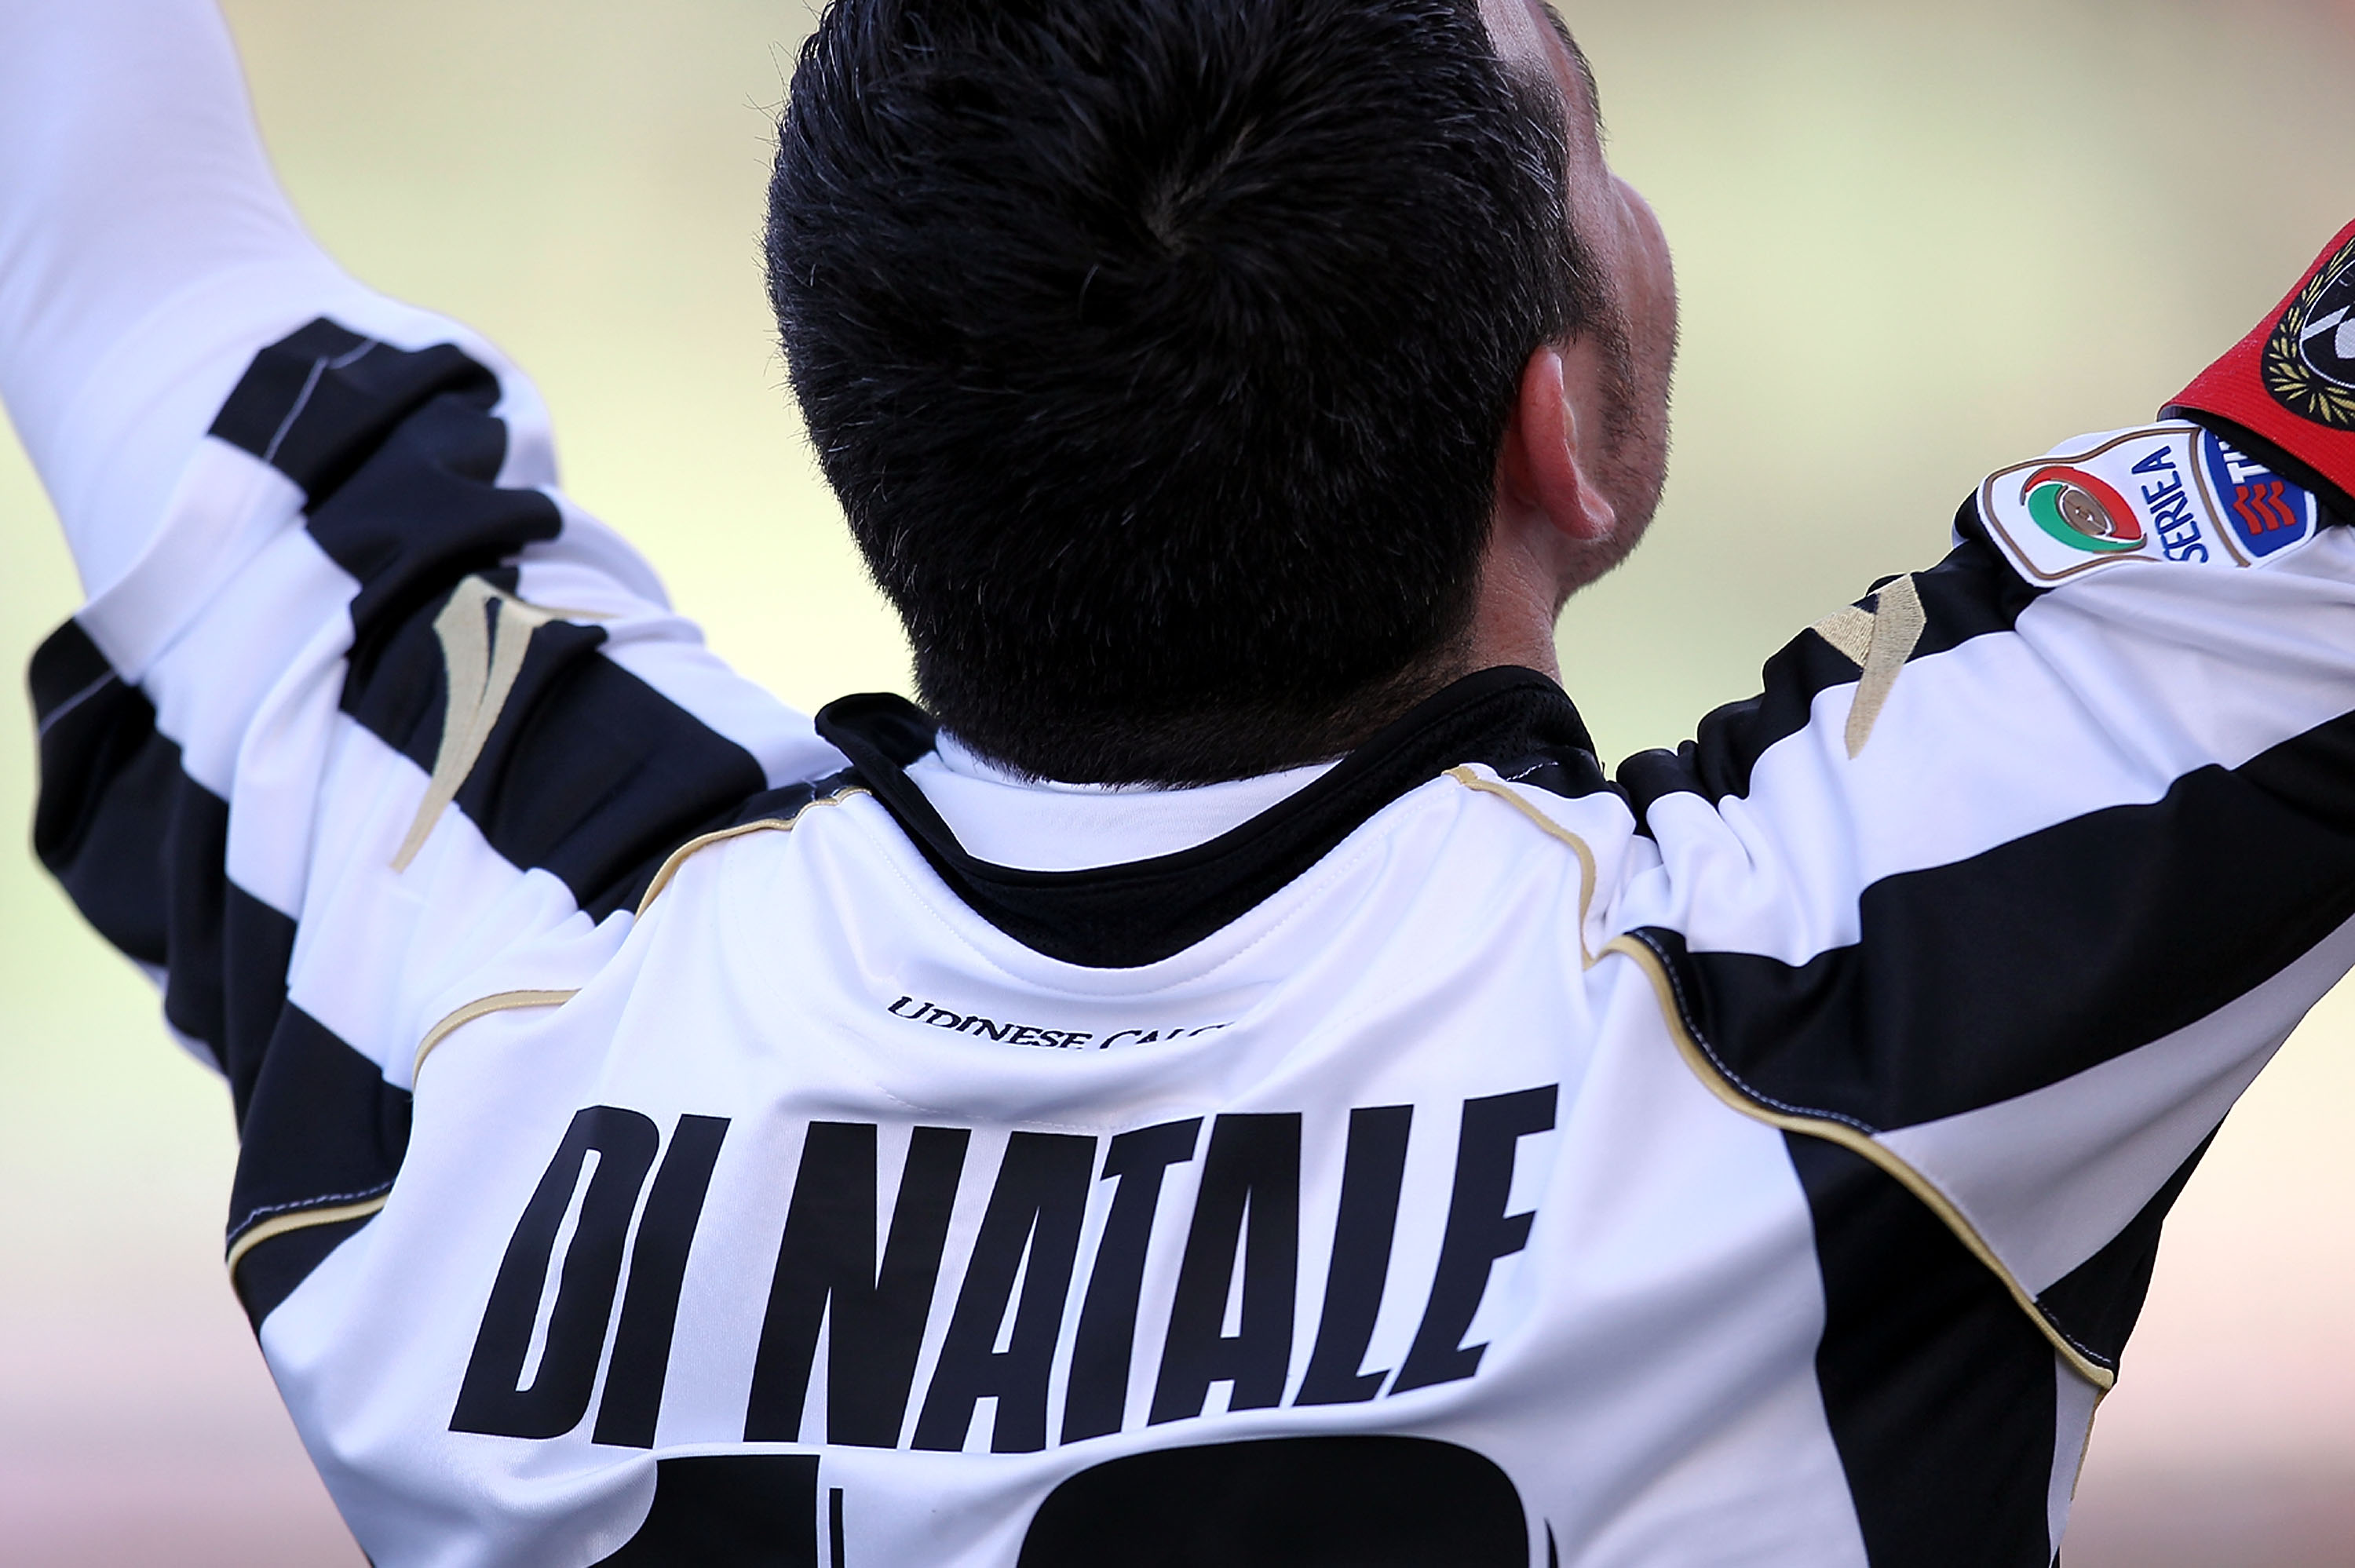 UDINE, ITALY - MARCH 06: Antonio Di Natale of Udinese Calcio celebrates after scoring a goal during the Serie A match between Udinese Calcio and AS Bari at Stadio Friuli on March 6, 2011 in Udine, Italy.  (Photo by Gabriele Maltinti/Getty Images)